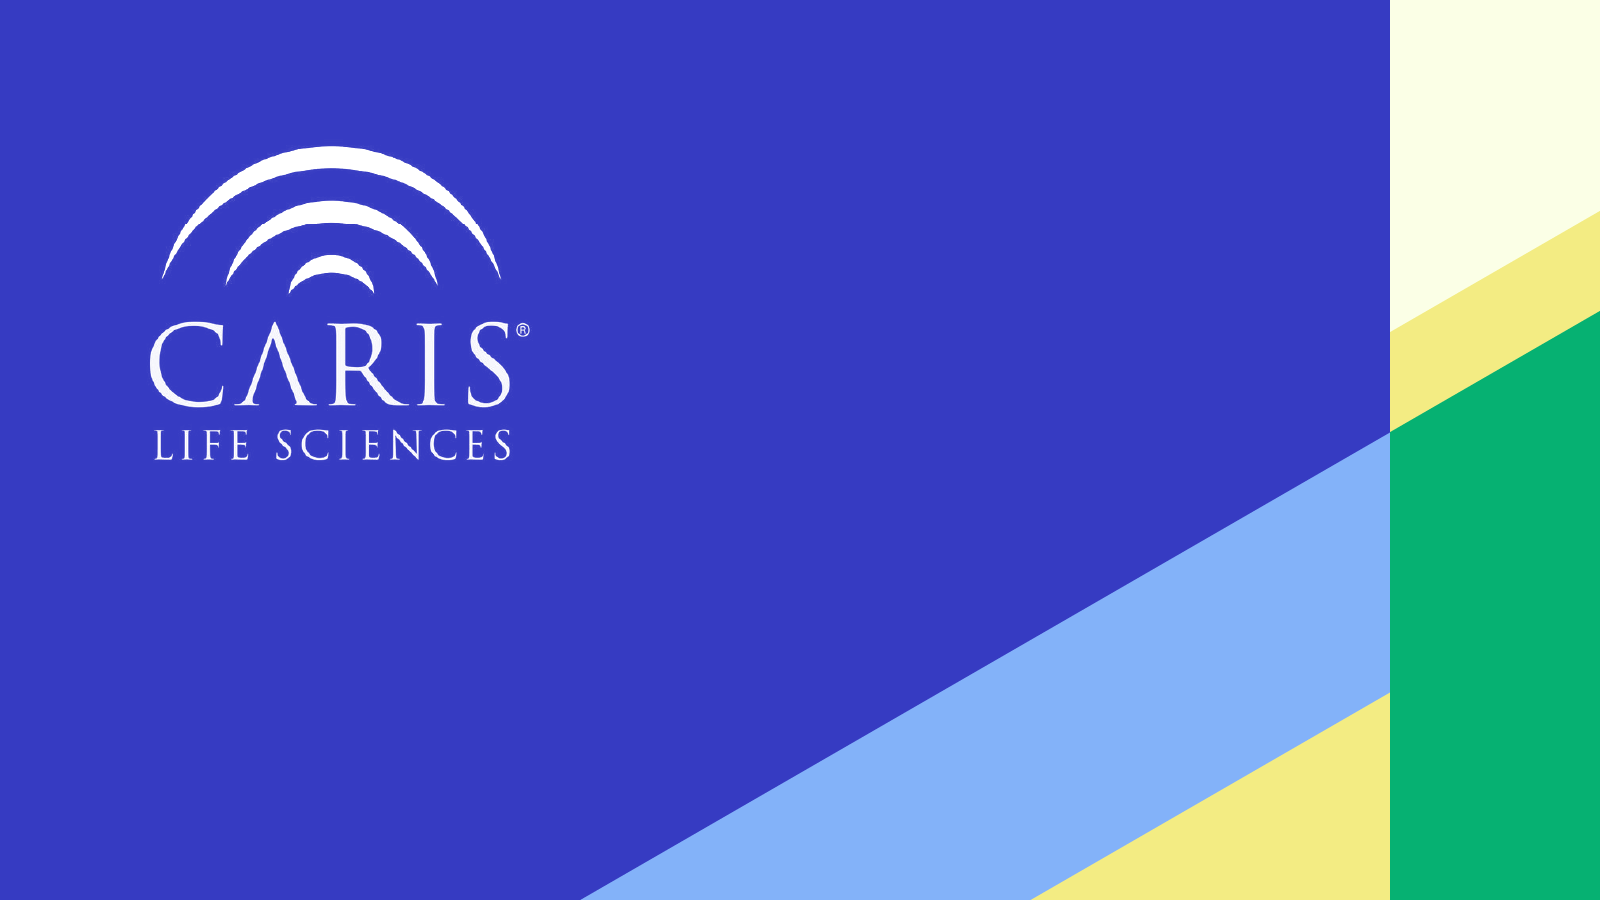 Caris Life Sciences and Flatiron Health Partner to Vastly Increase Access to Most Comprehensive Molecular Testing Available